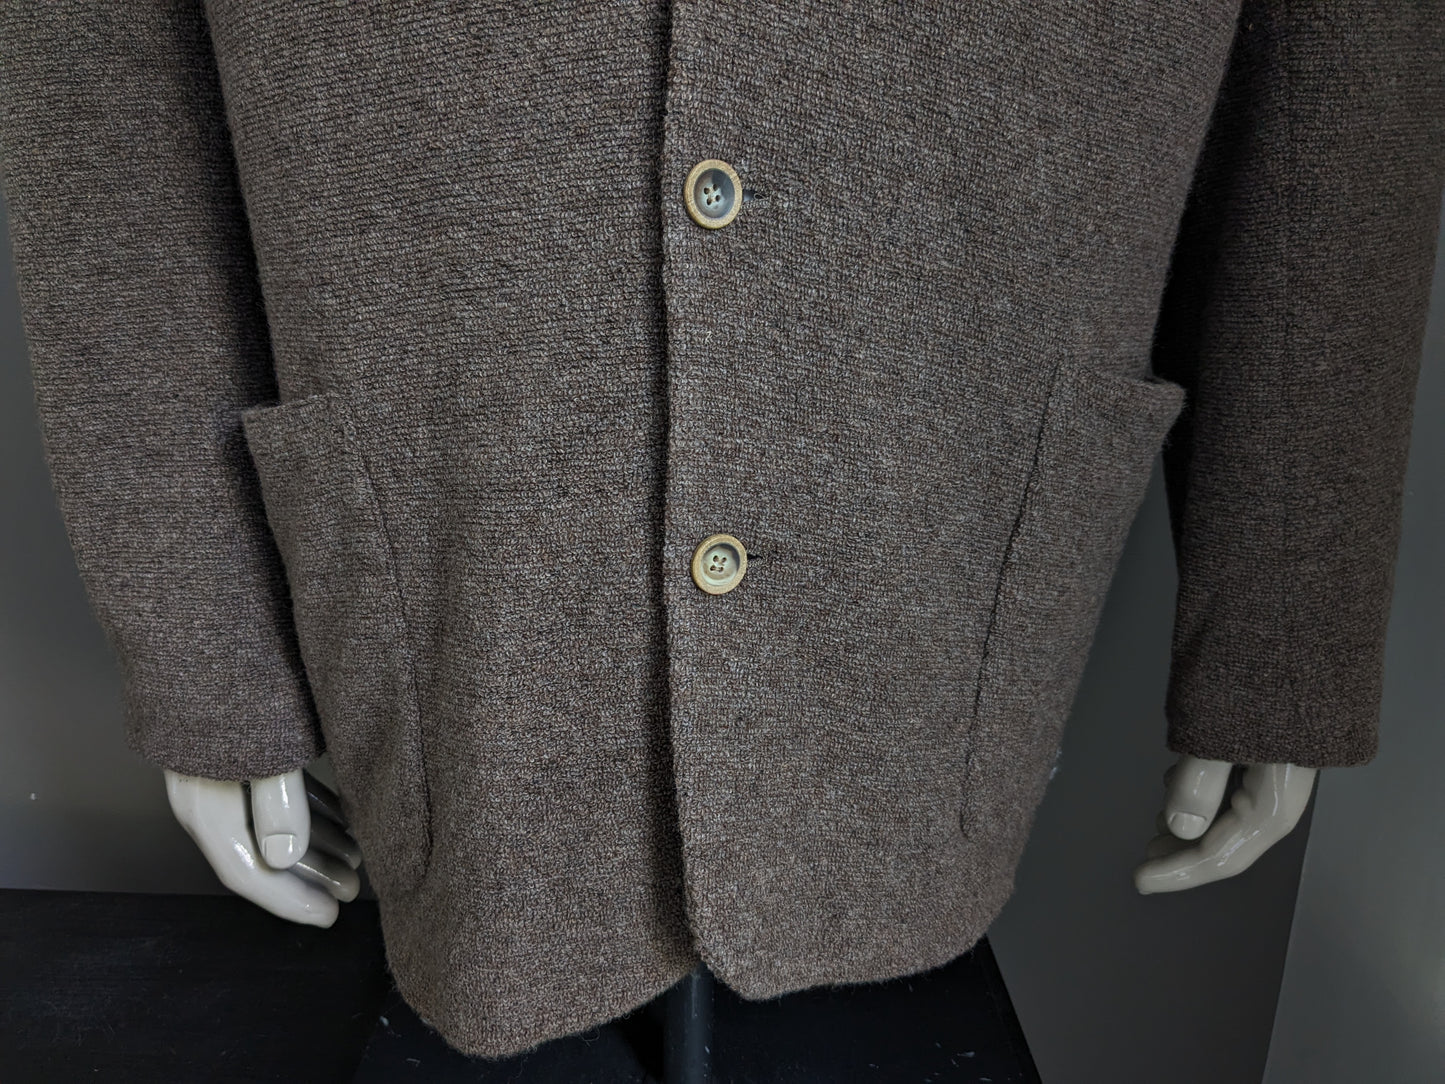 Matinique woolen jacket. Brown mixed terry cloth. Size 56 / XL. 64% wool.